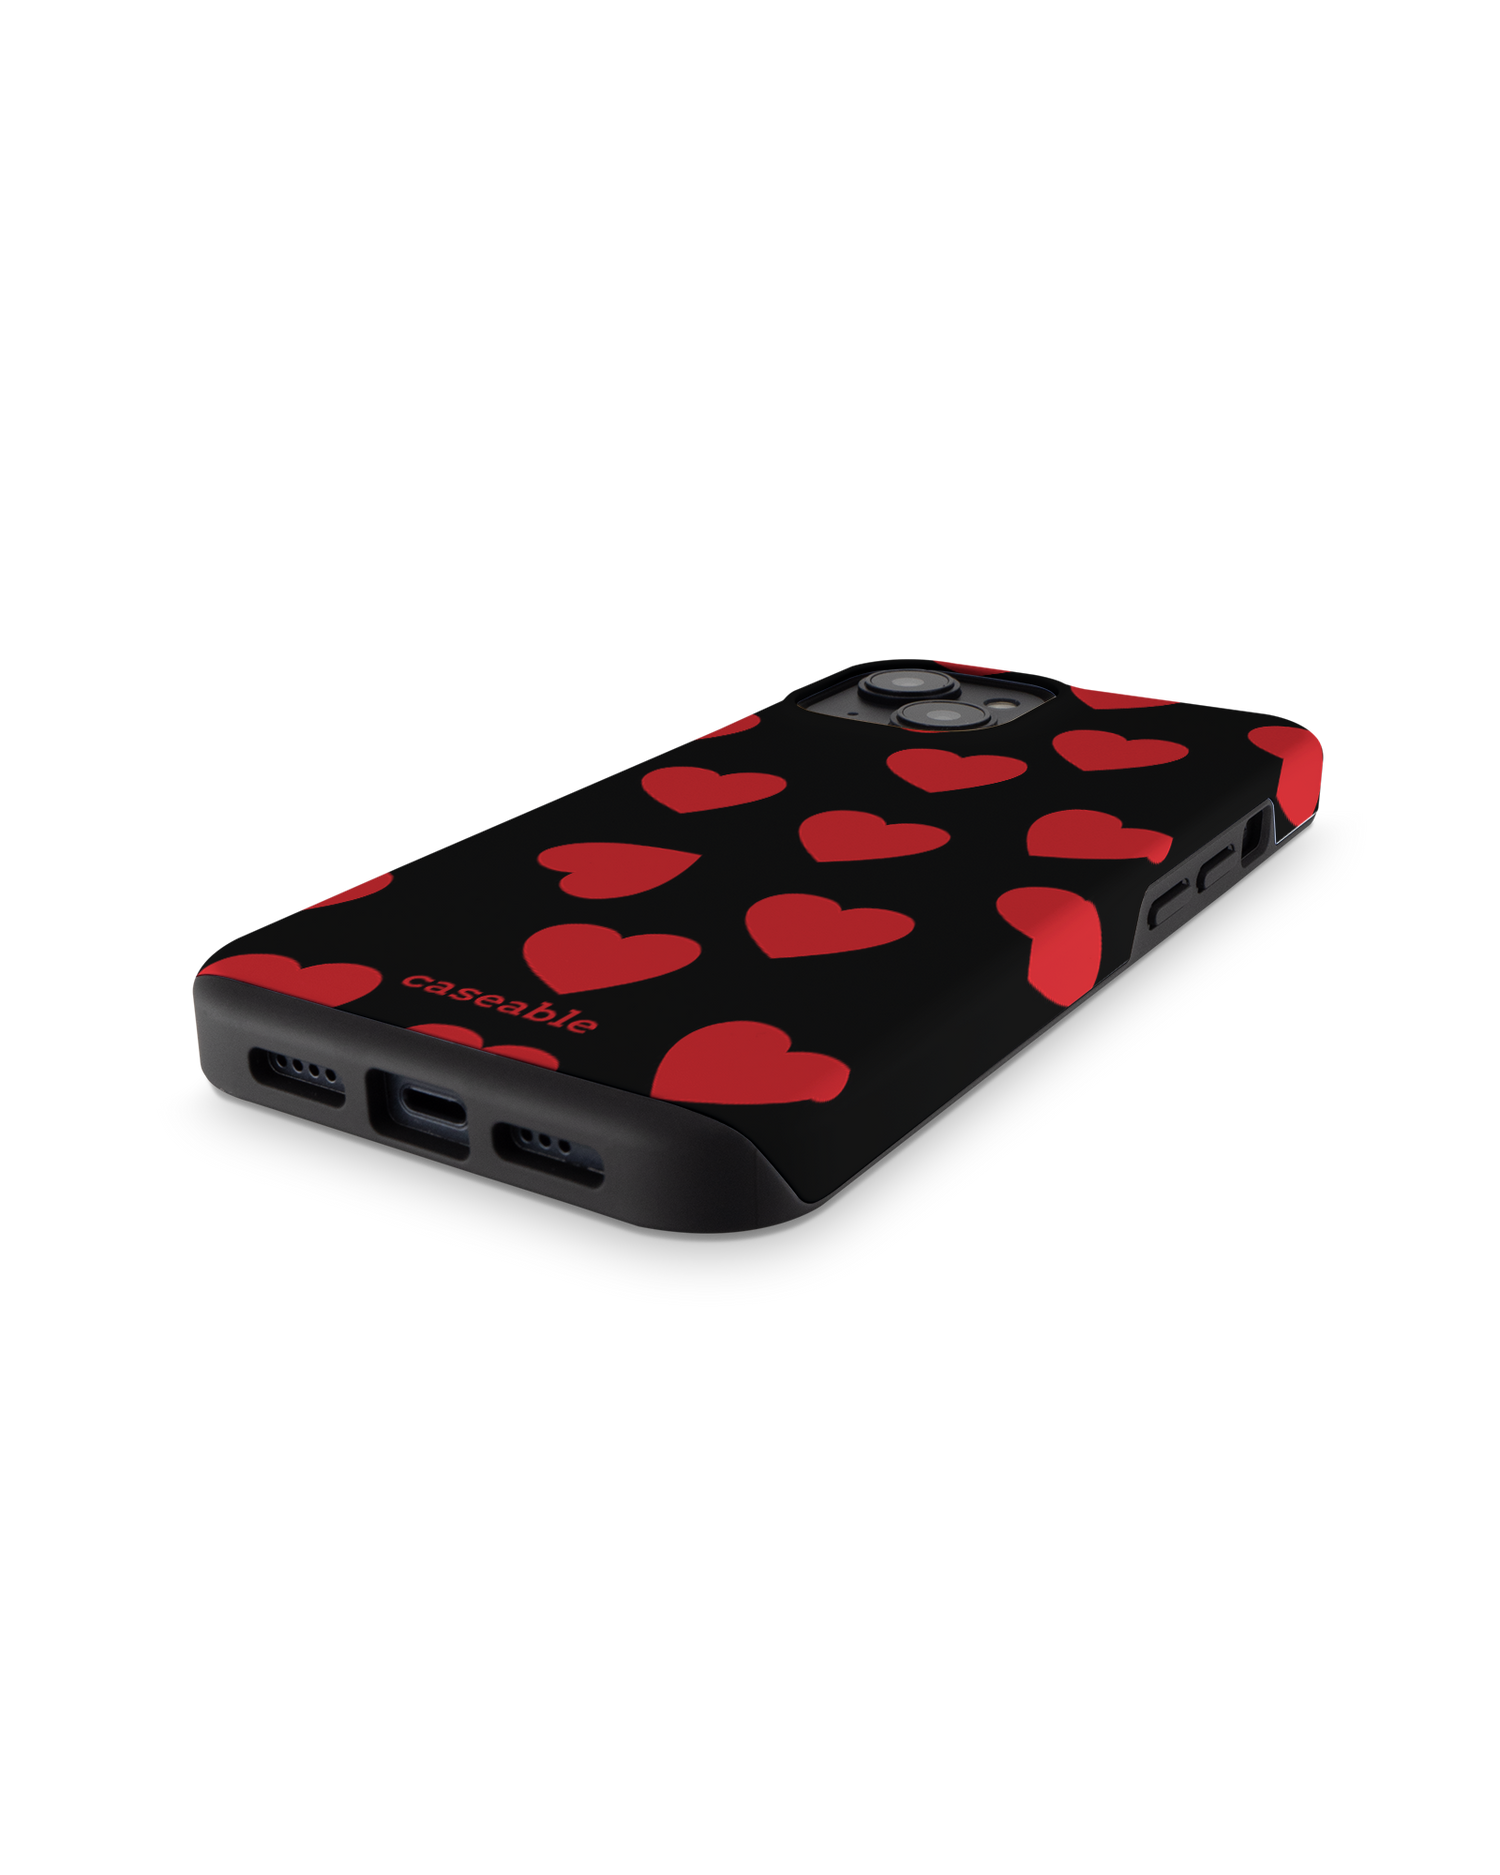 Repeating Hearts Premium Phone for Apple iPhone 14: Bottom View